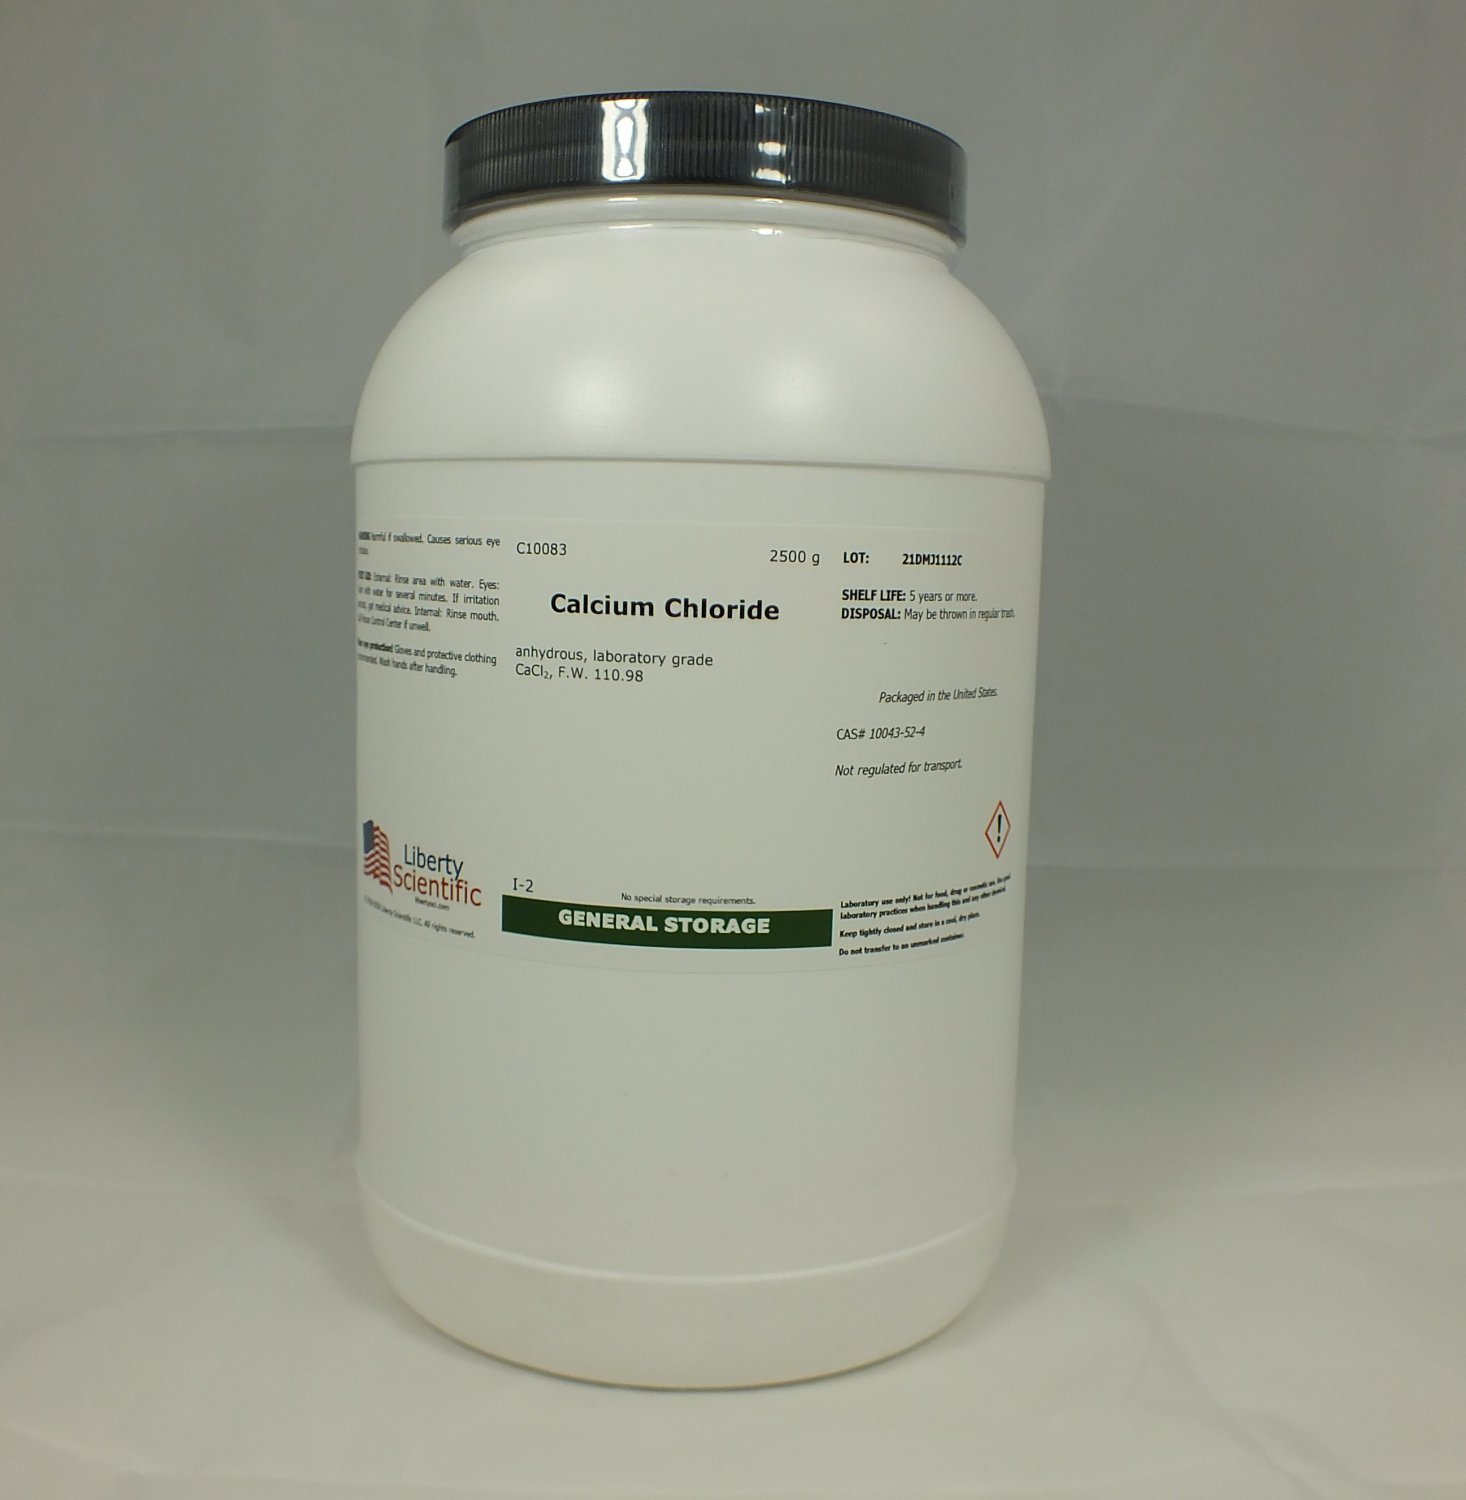 Calcium Chloride, anhydrous, 2500 g (C10083)